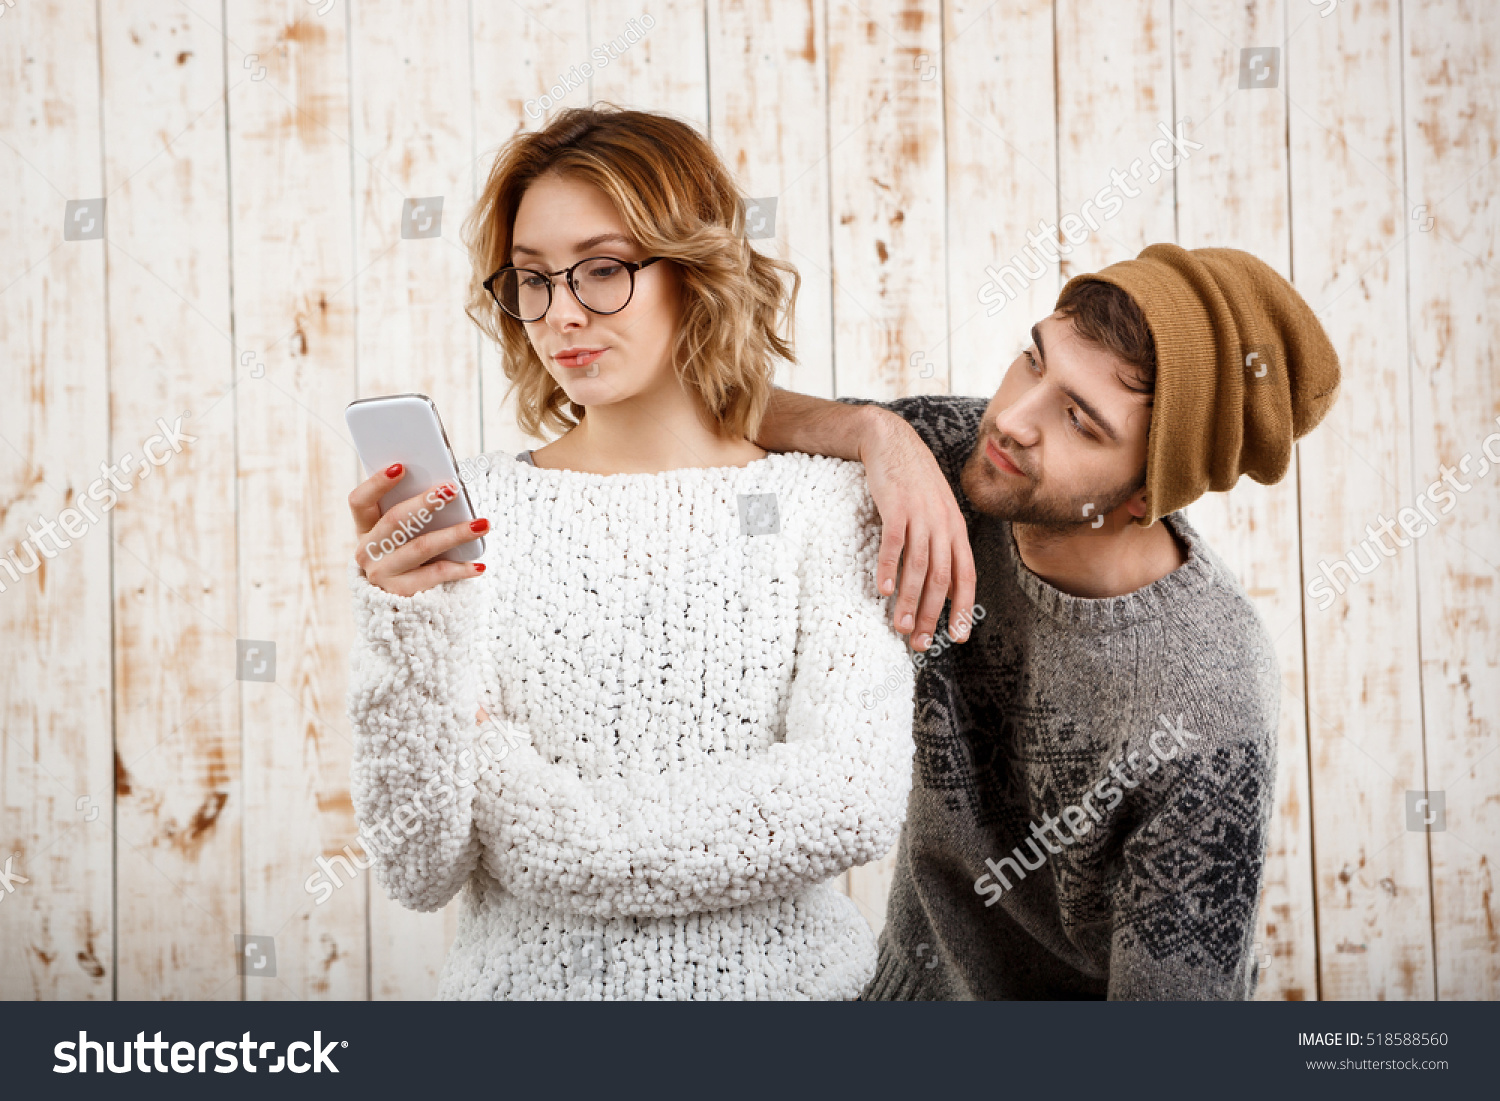 Man unnerve his girlfriend looking at phone over wooden background. #518588560